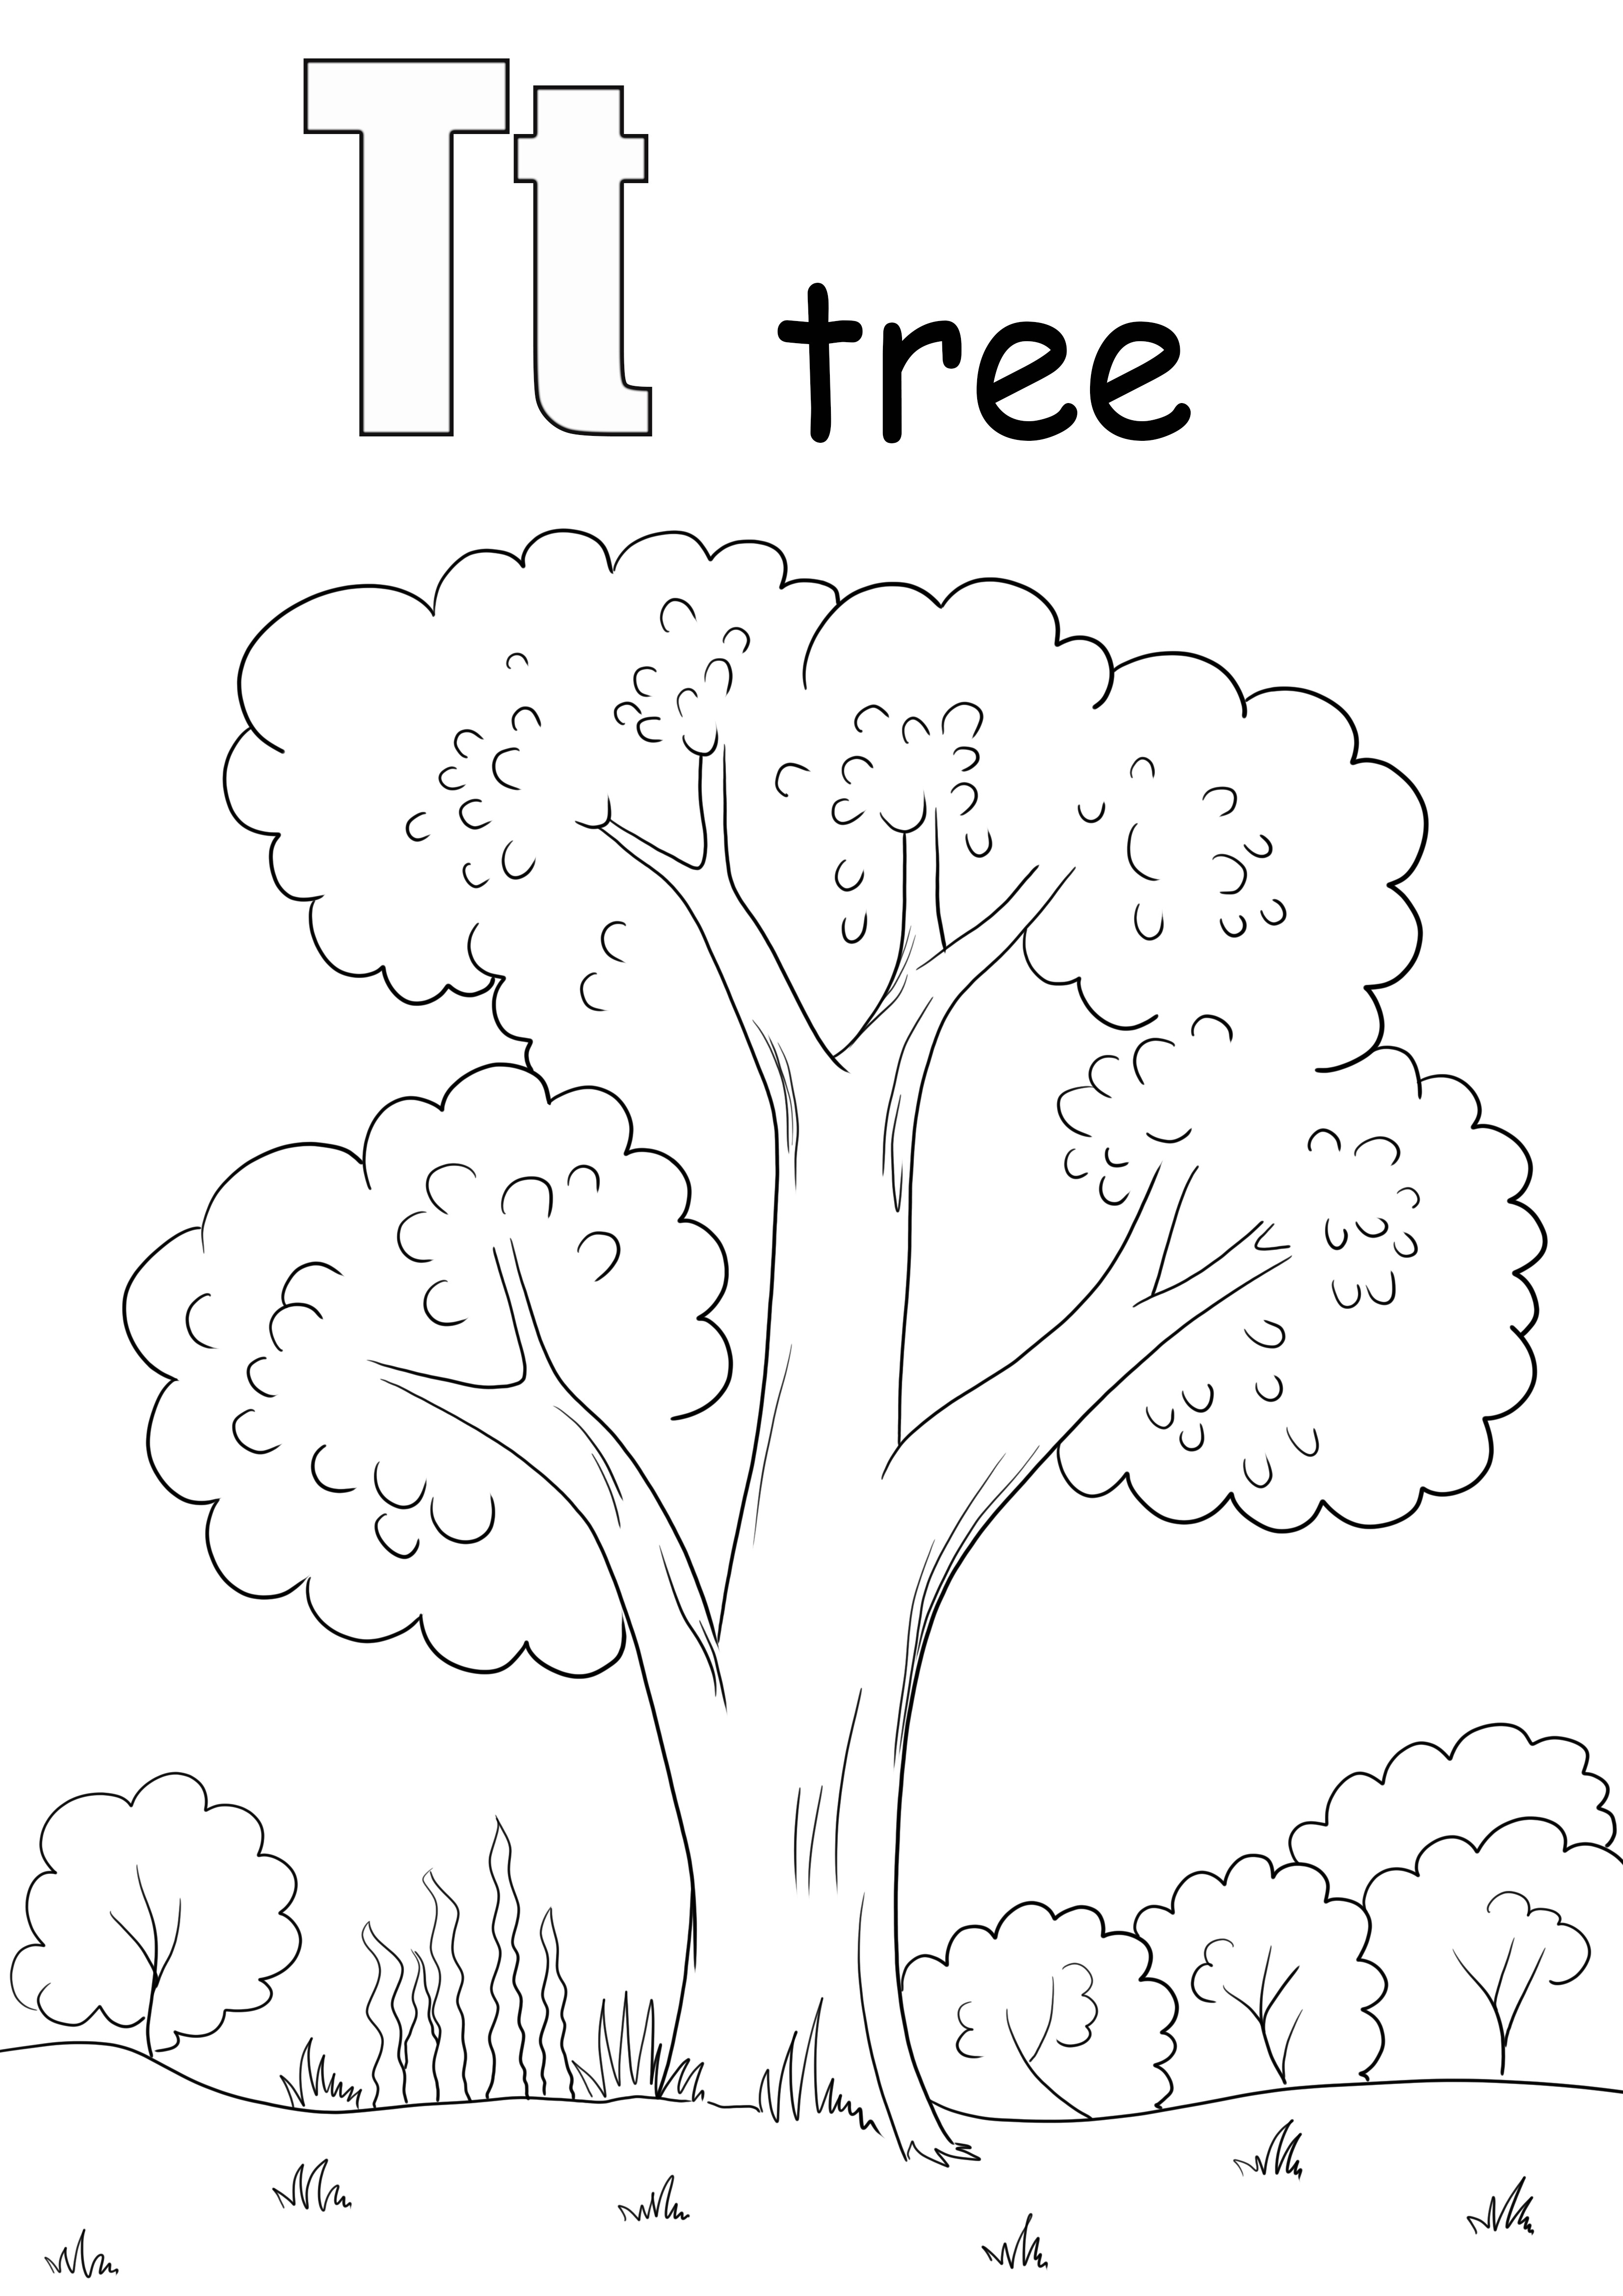 T is for tree word coloring and free printing page